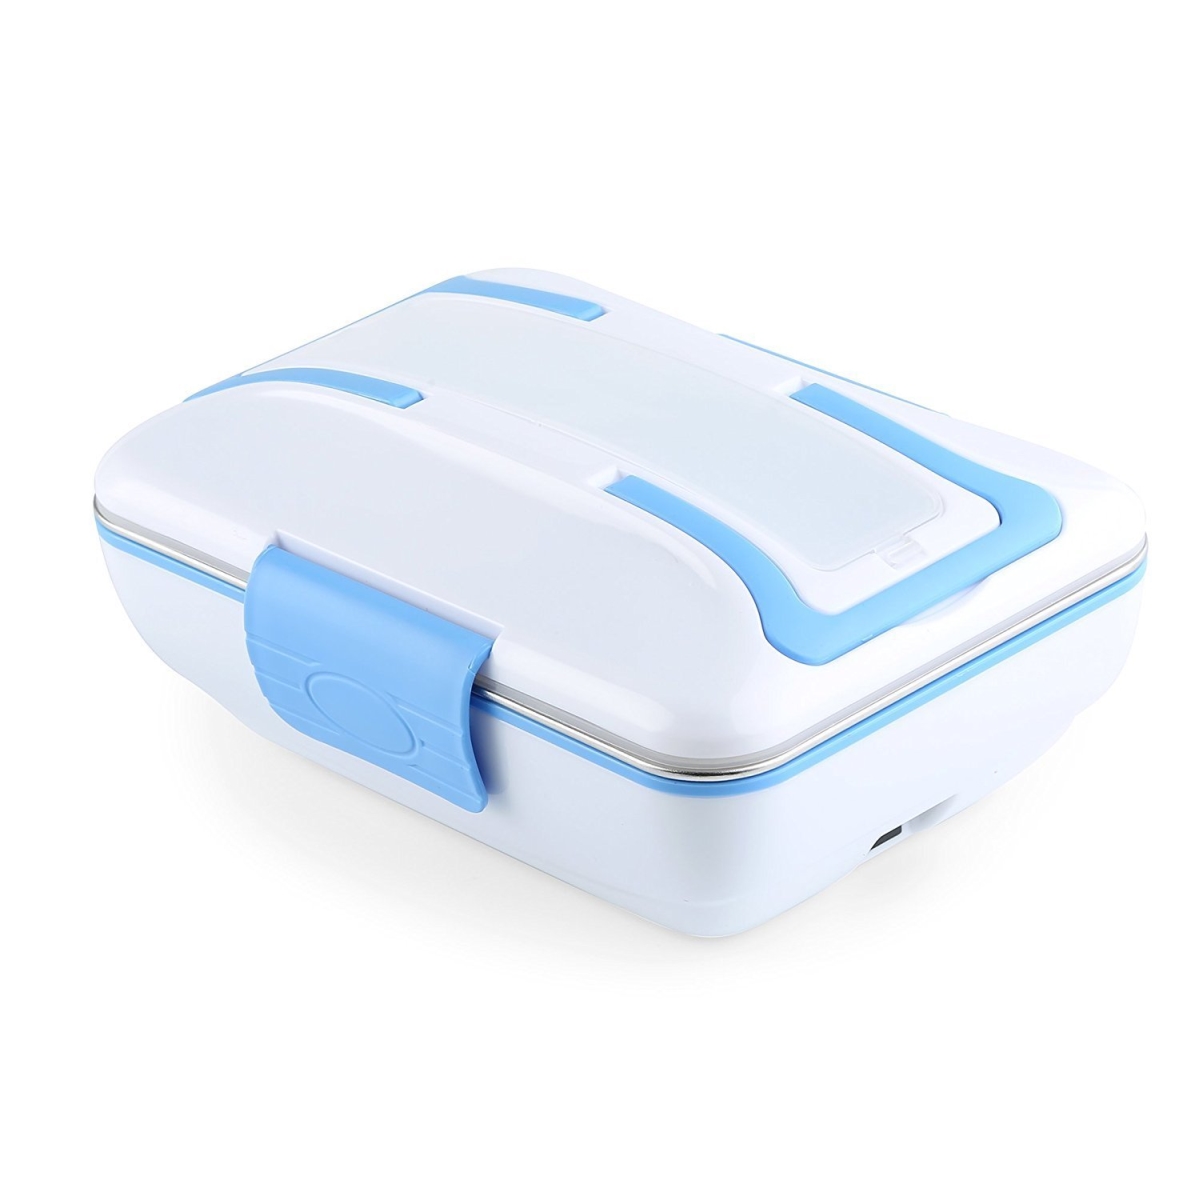 Ehb-304 Stainless Steel Heating Lunch Box, White